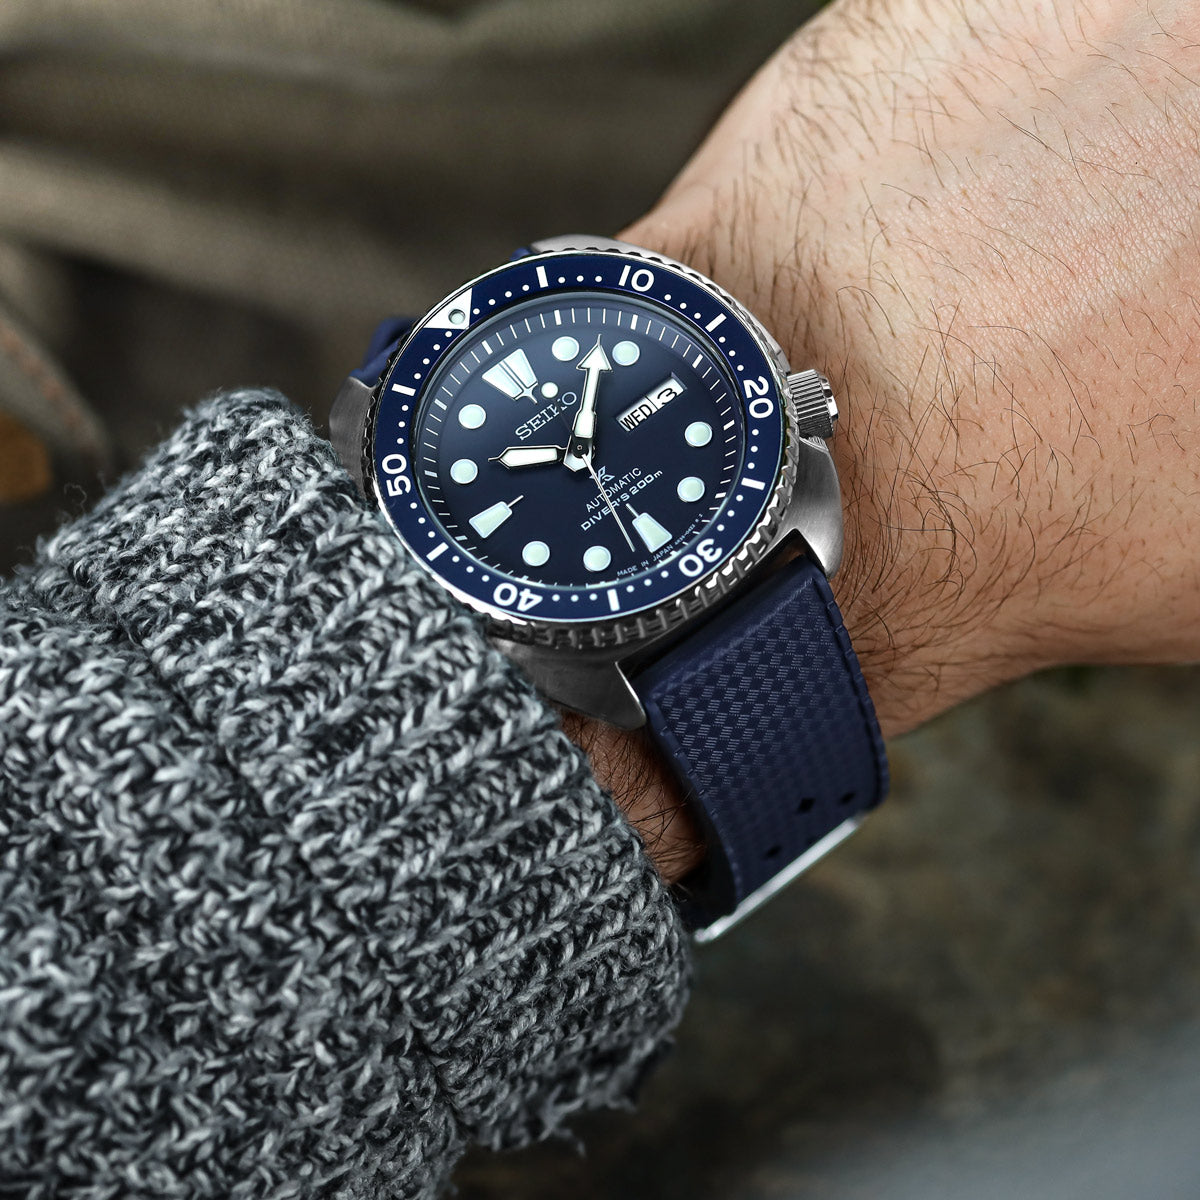 ZULUDIVER Modern Tropical Watch Strap (MkII) - Navy - Silver Hardware - additional image 3